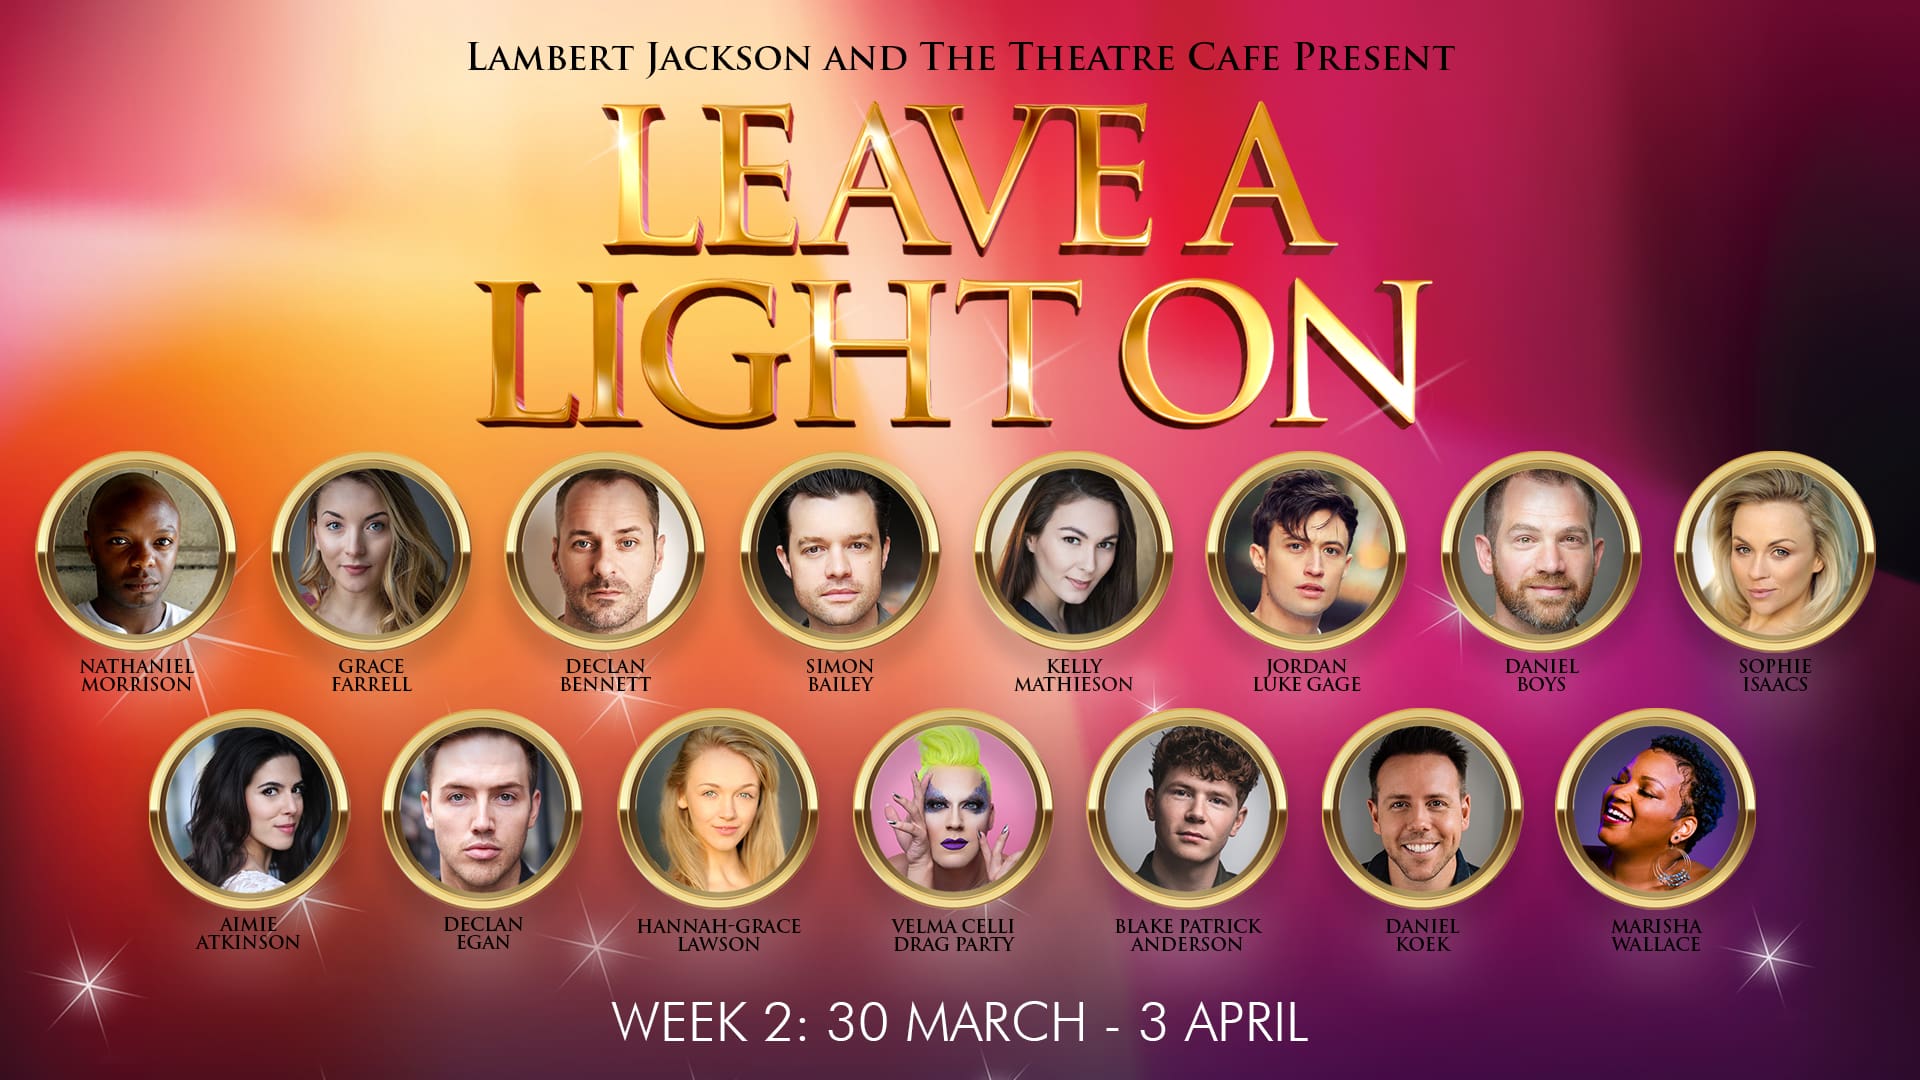 Schedule announced for week 2 of Leave A Light On